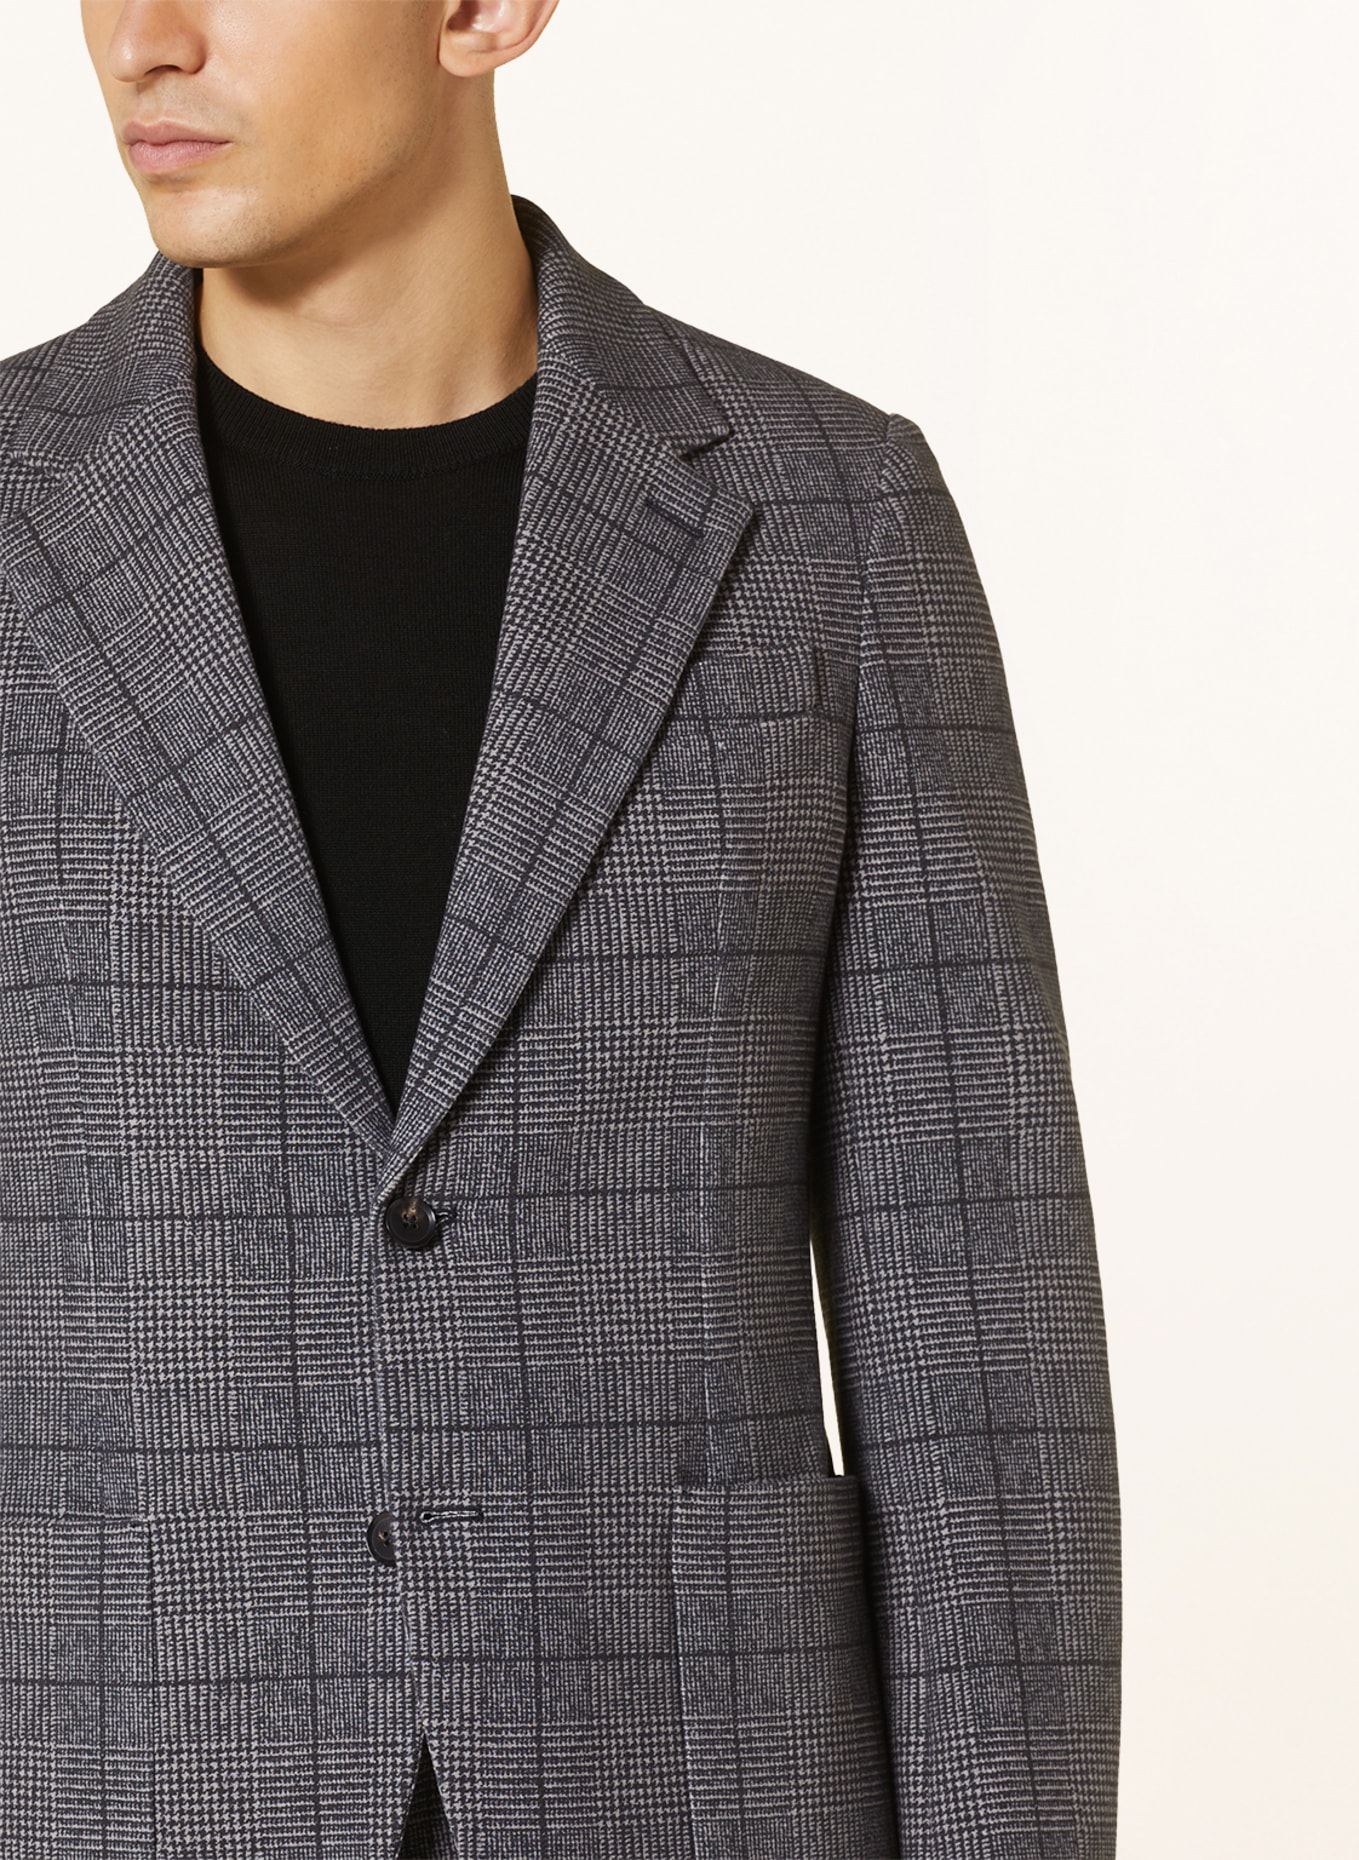 CIRCOLO 1901 Suit jacket extra slim fit made of jersey, Color: DARK BLUE/ LIGHT GRAY (Image 5)